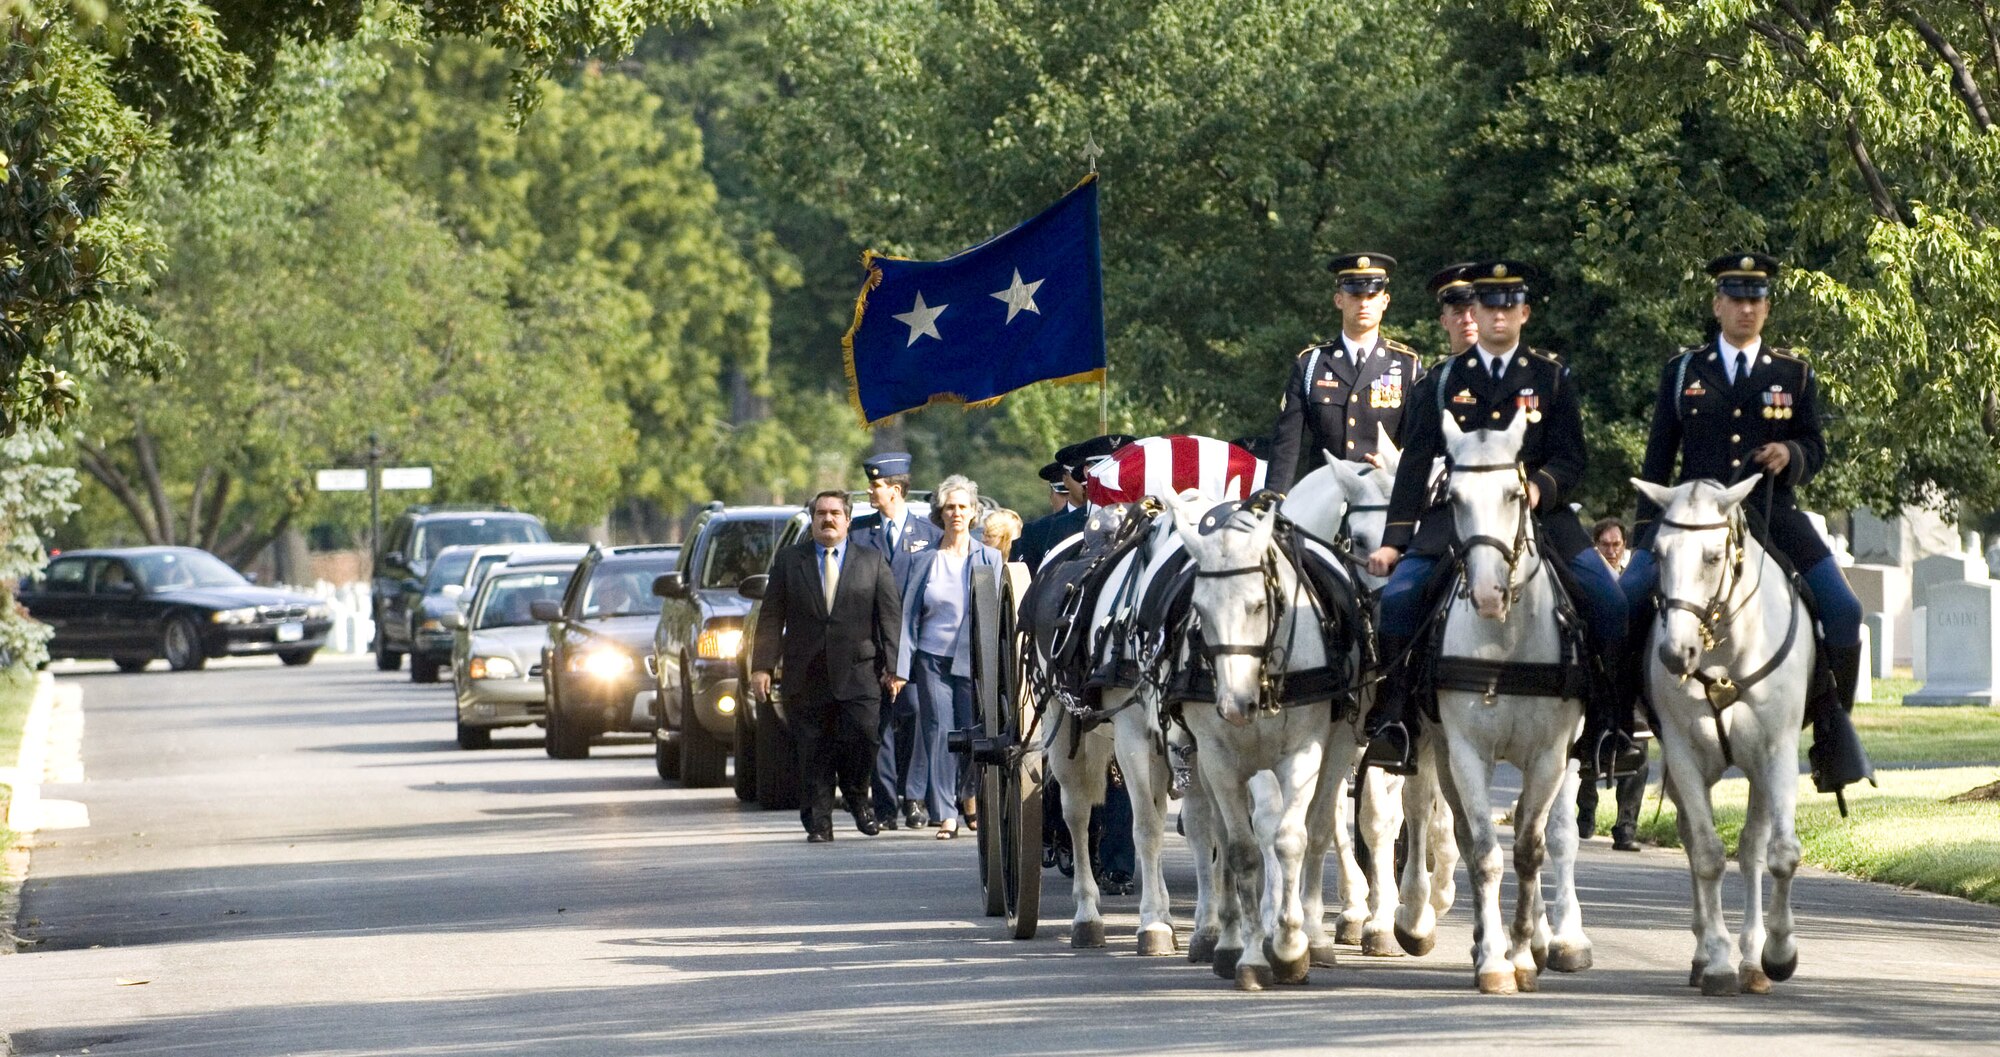 An Army caisson leads a funeral procession for retired Maj. Gen. Jack I. Posner to his final resting place at Arlington National Cemetery on Aug. 11. General Posner was among the last bomber pilots to have served in World War II. (U.S. Air Force photo/Tech. Sgt. Cohen A. Young)